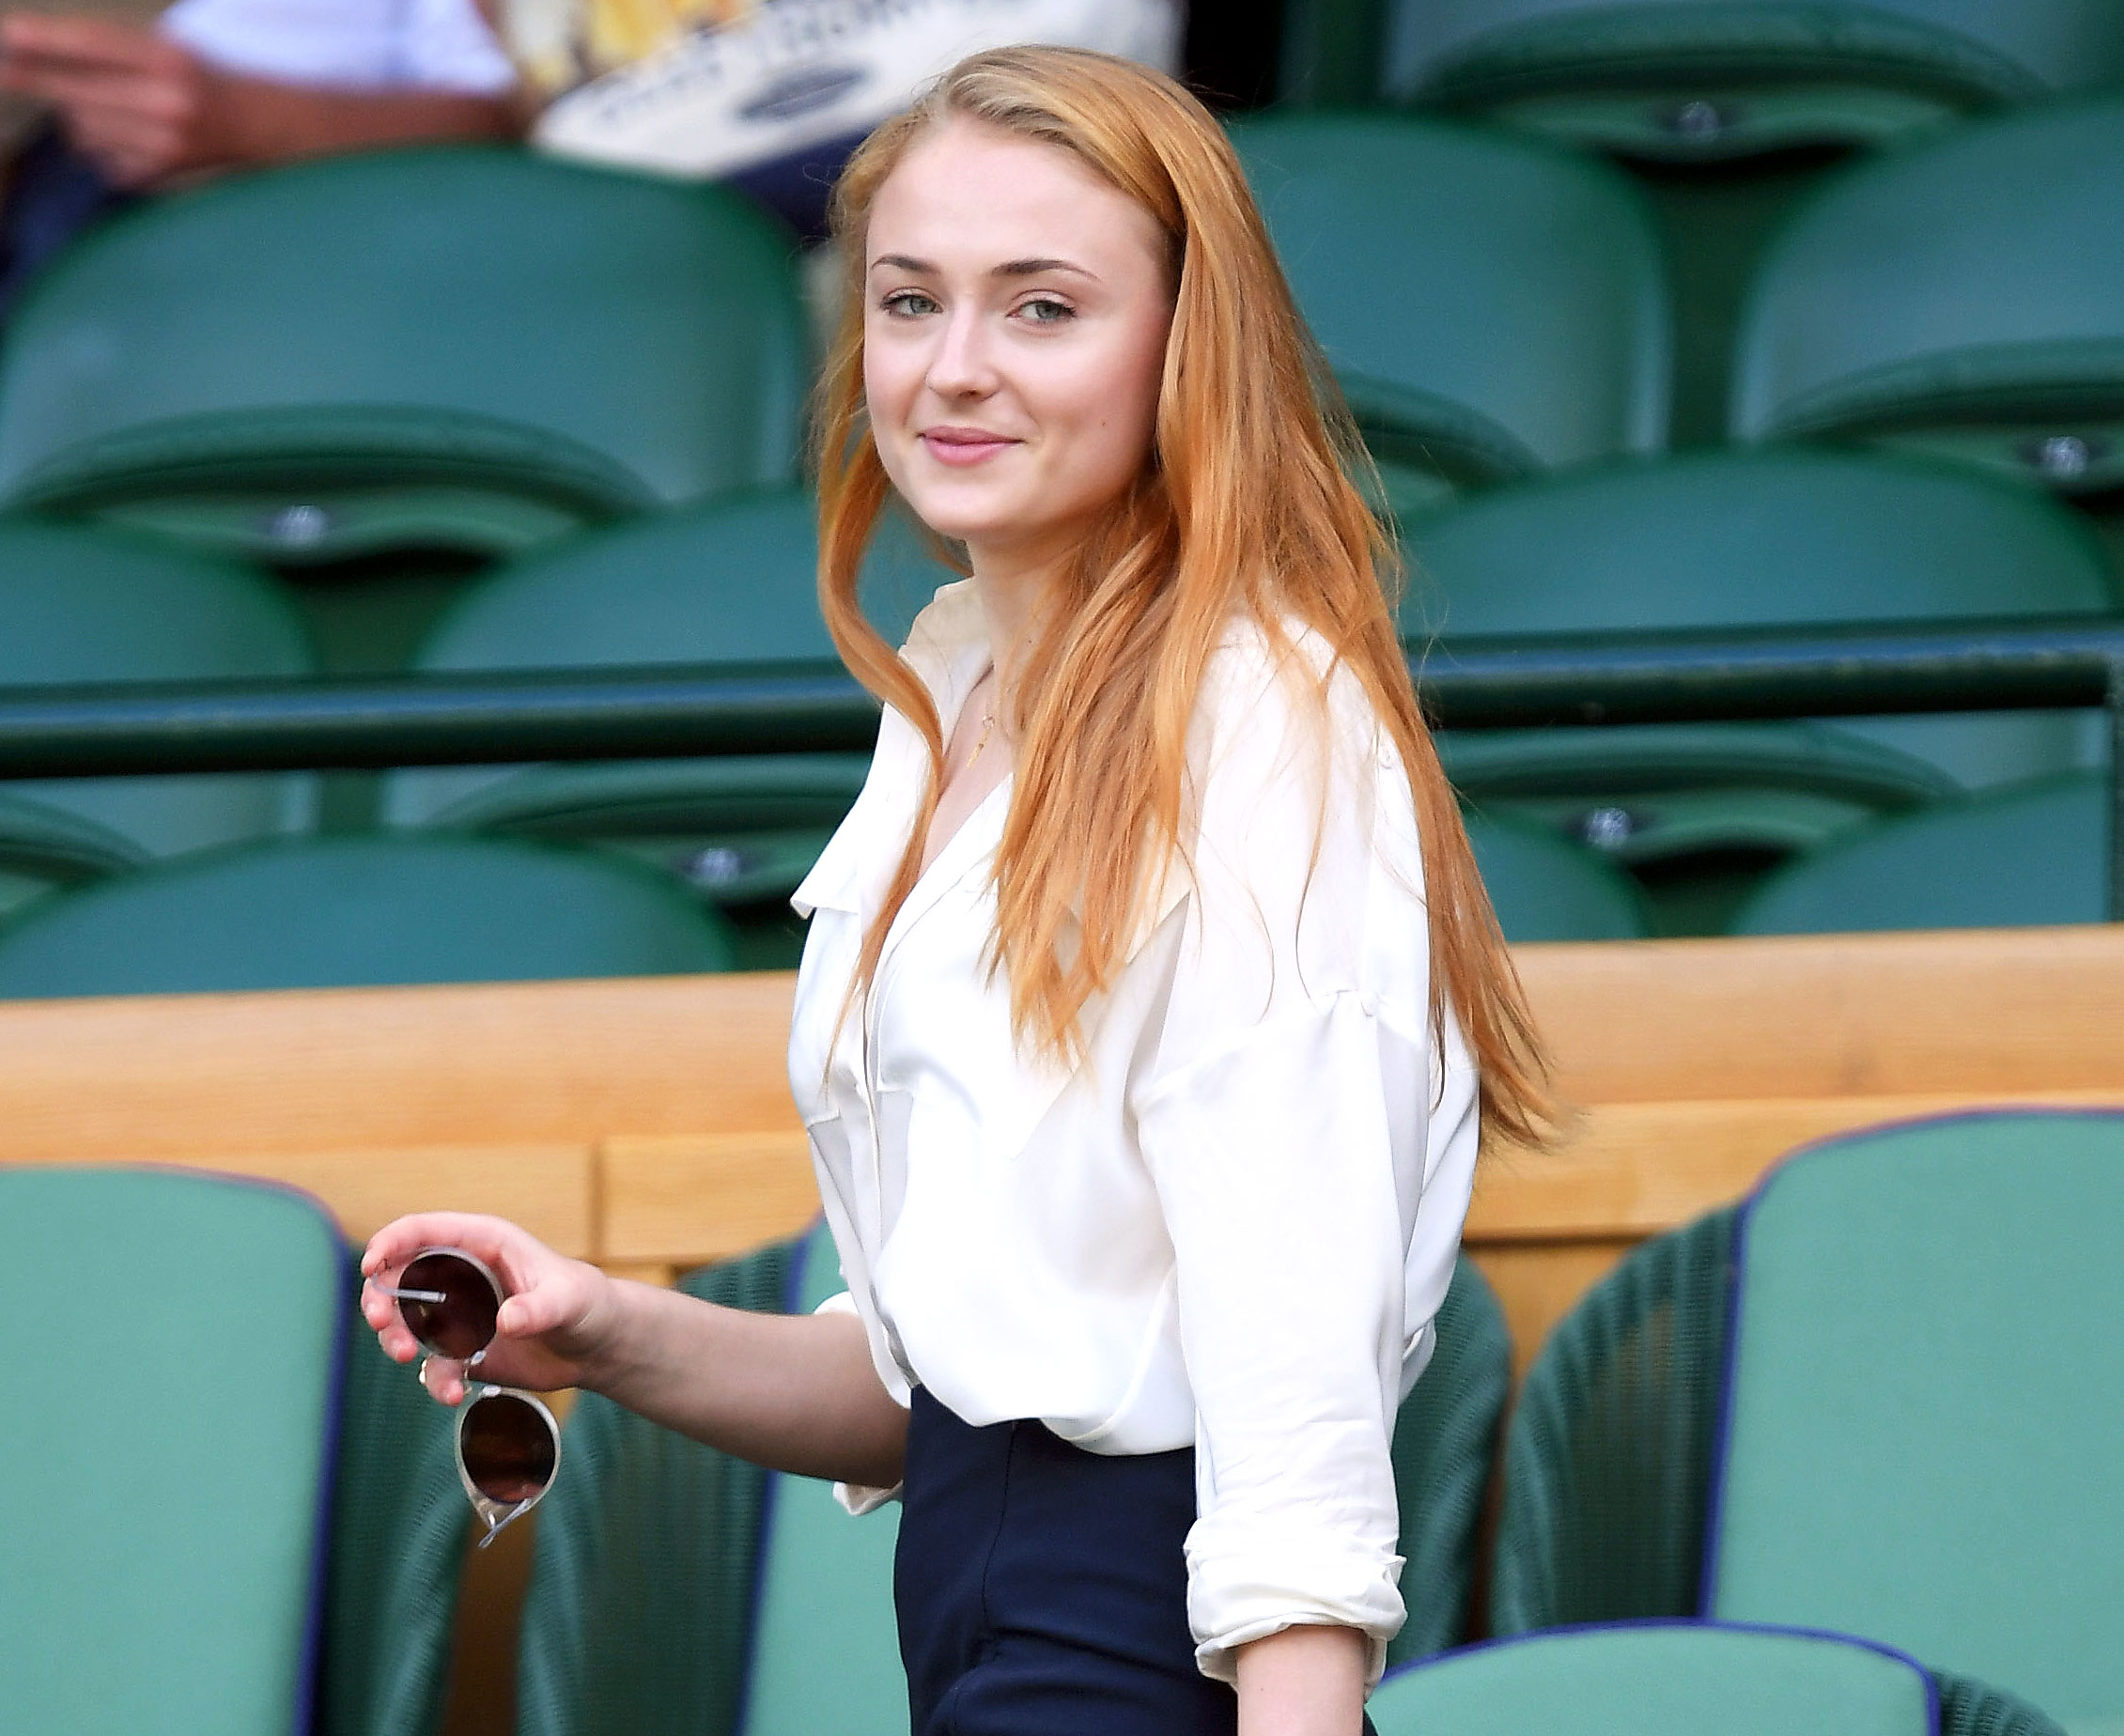 Game of Thrones' star Sophie Turner dyes hair blonde - Times of India